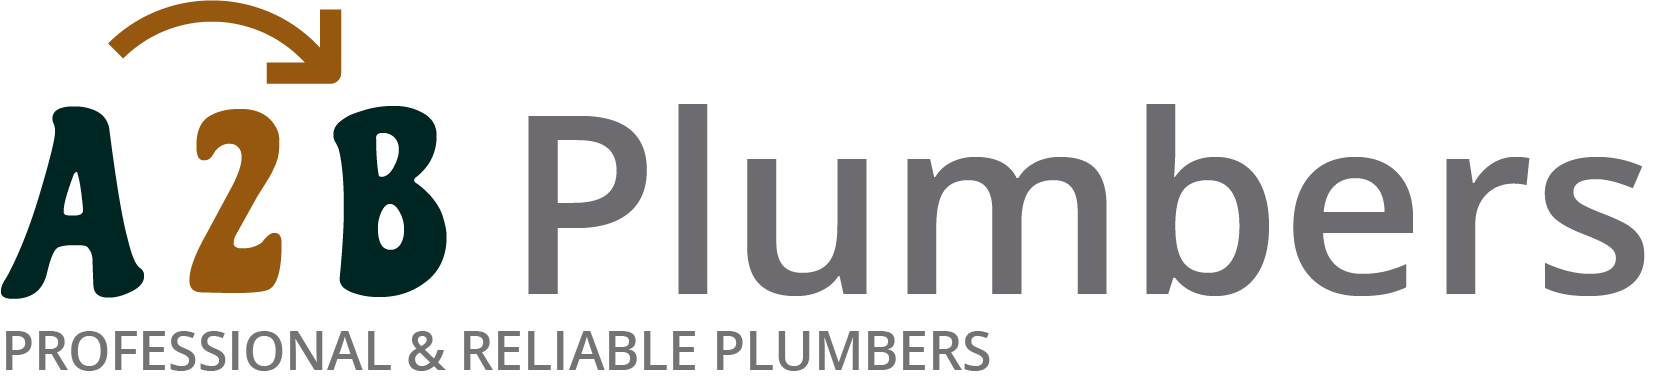 If you need a boiler installed, a radiator repaired or a leaking tap fixed, call us now - we provide services for properties in Penrith and the local area.